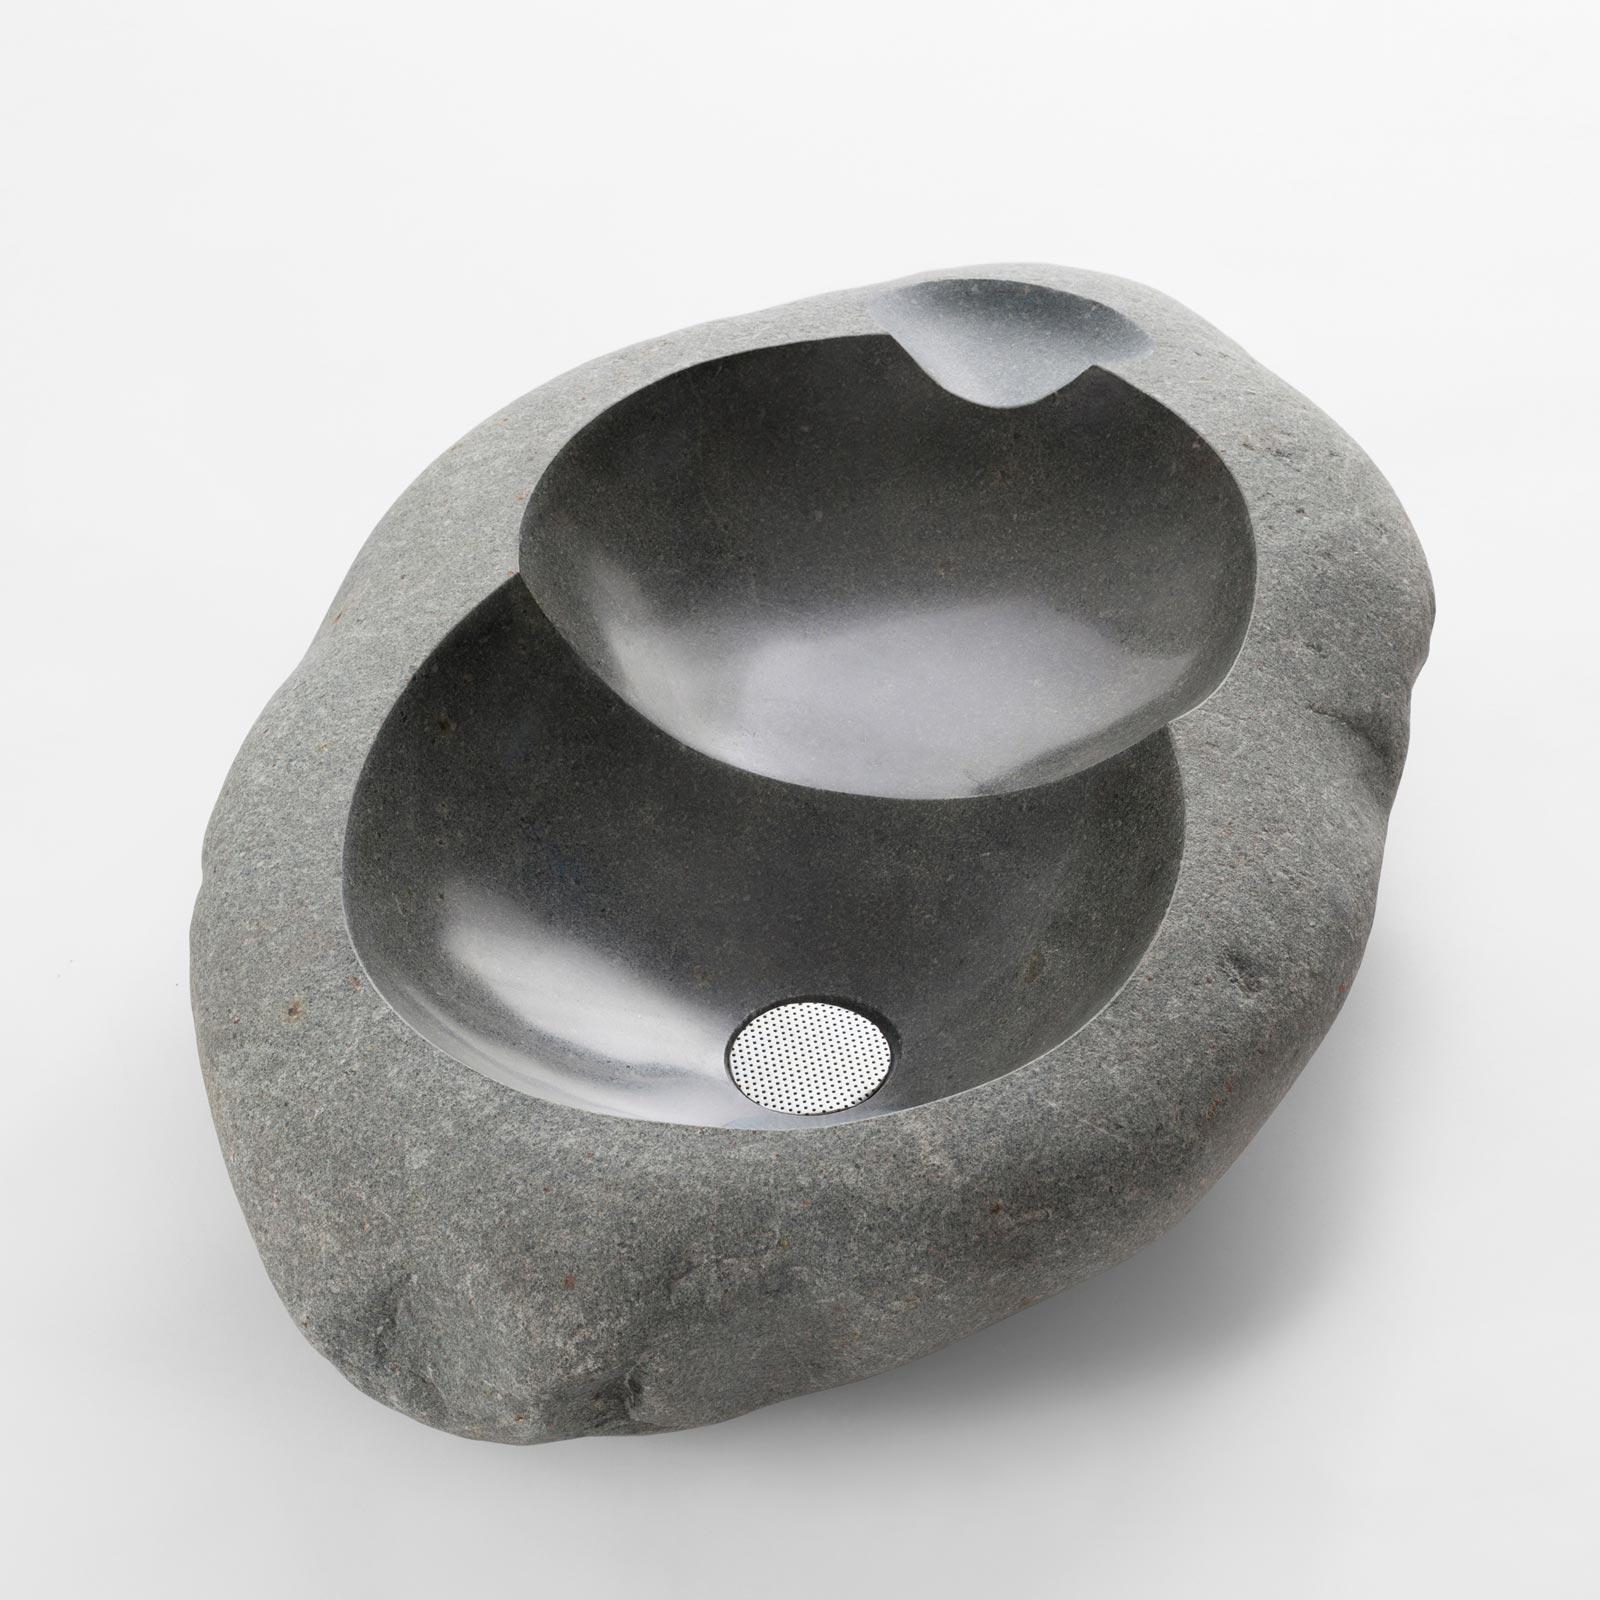 Rimac Stones N°1 by Estudio Rafael Freyre
Dimensions: W 70 D 47 x H 17 cm 
Materials: River Stones

Rimac Stones explores our hydrographic landscape and its interaction with the materiality of our territory. The water we use daily connects us